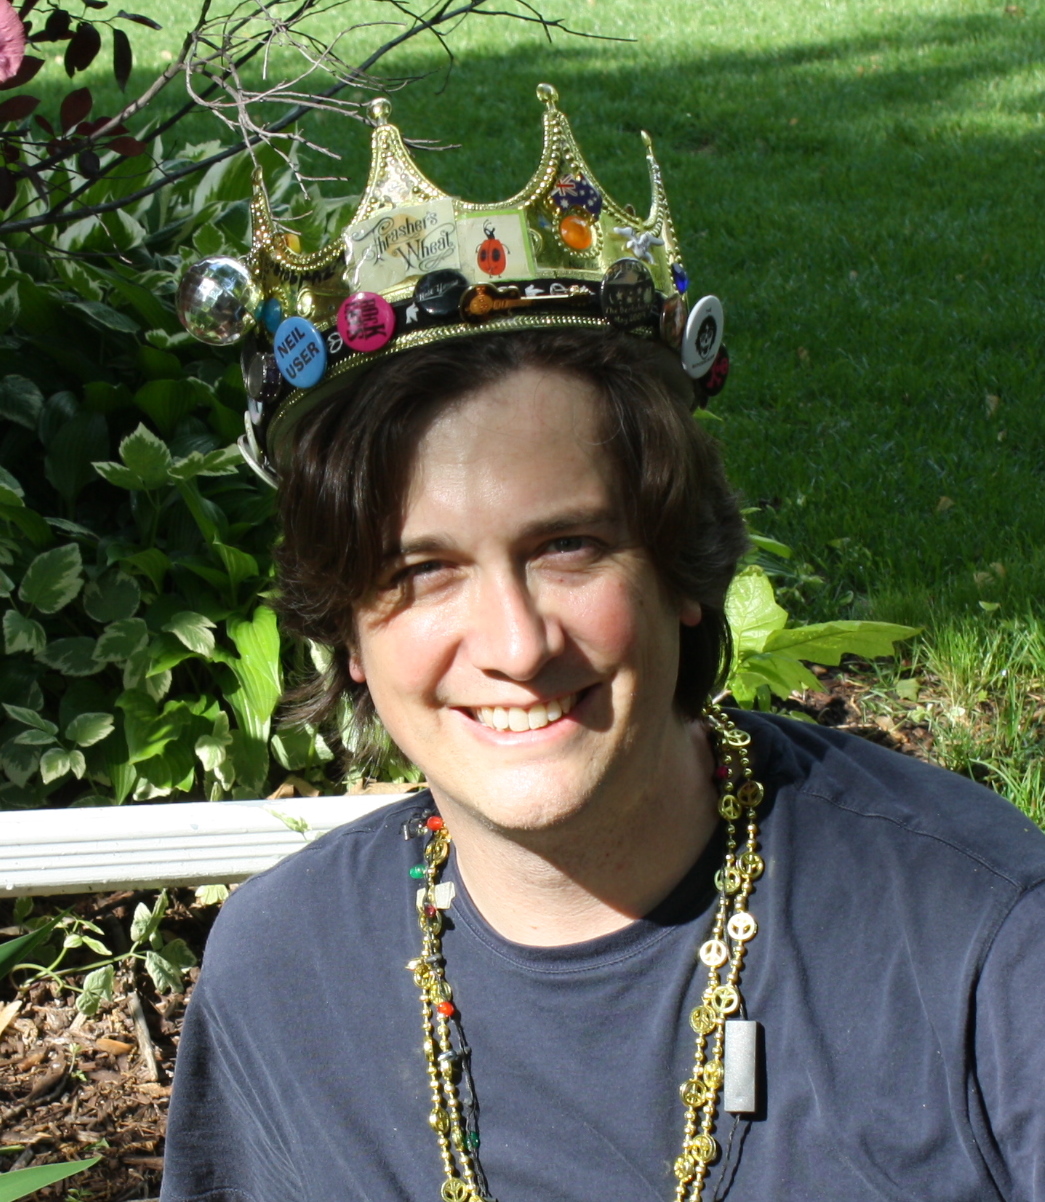 Photo of Dave Green wearing the ROTM crown